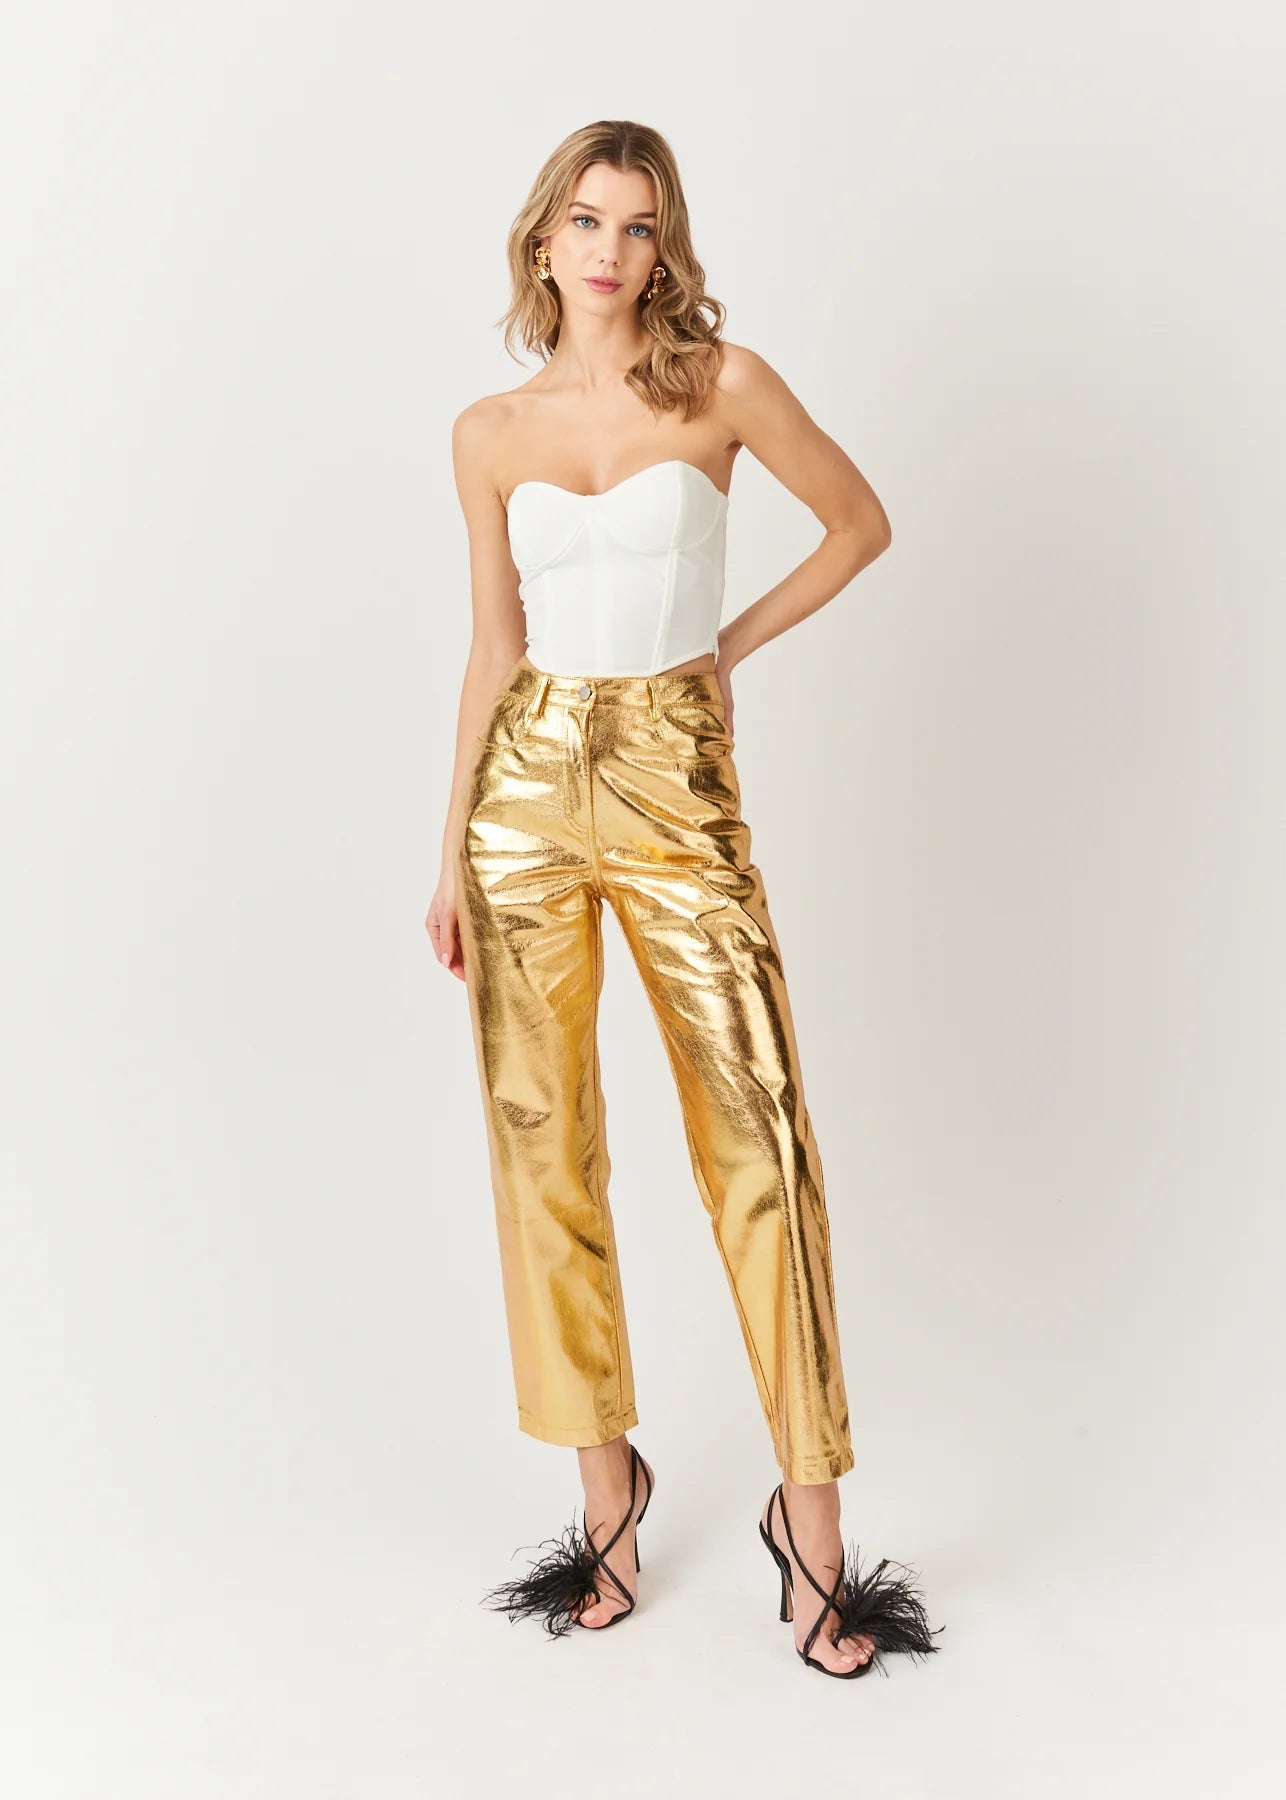 Amy Lynn Lupe pants in textured metallic gold - Something about Sofia